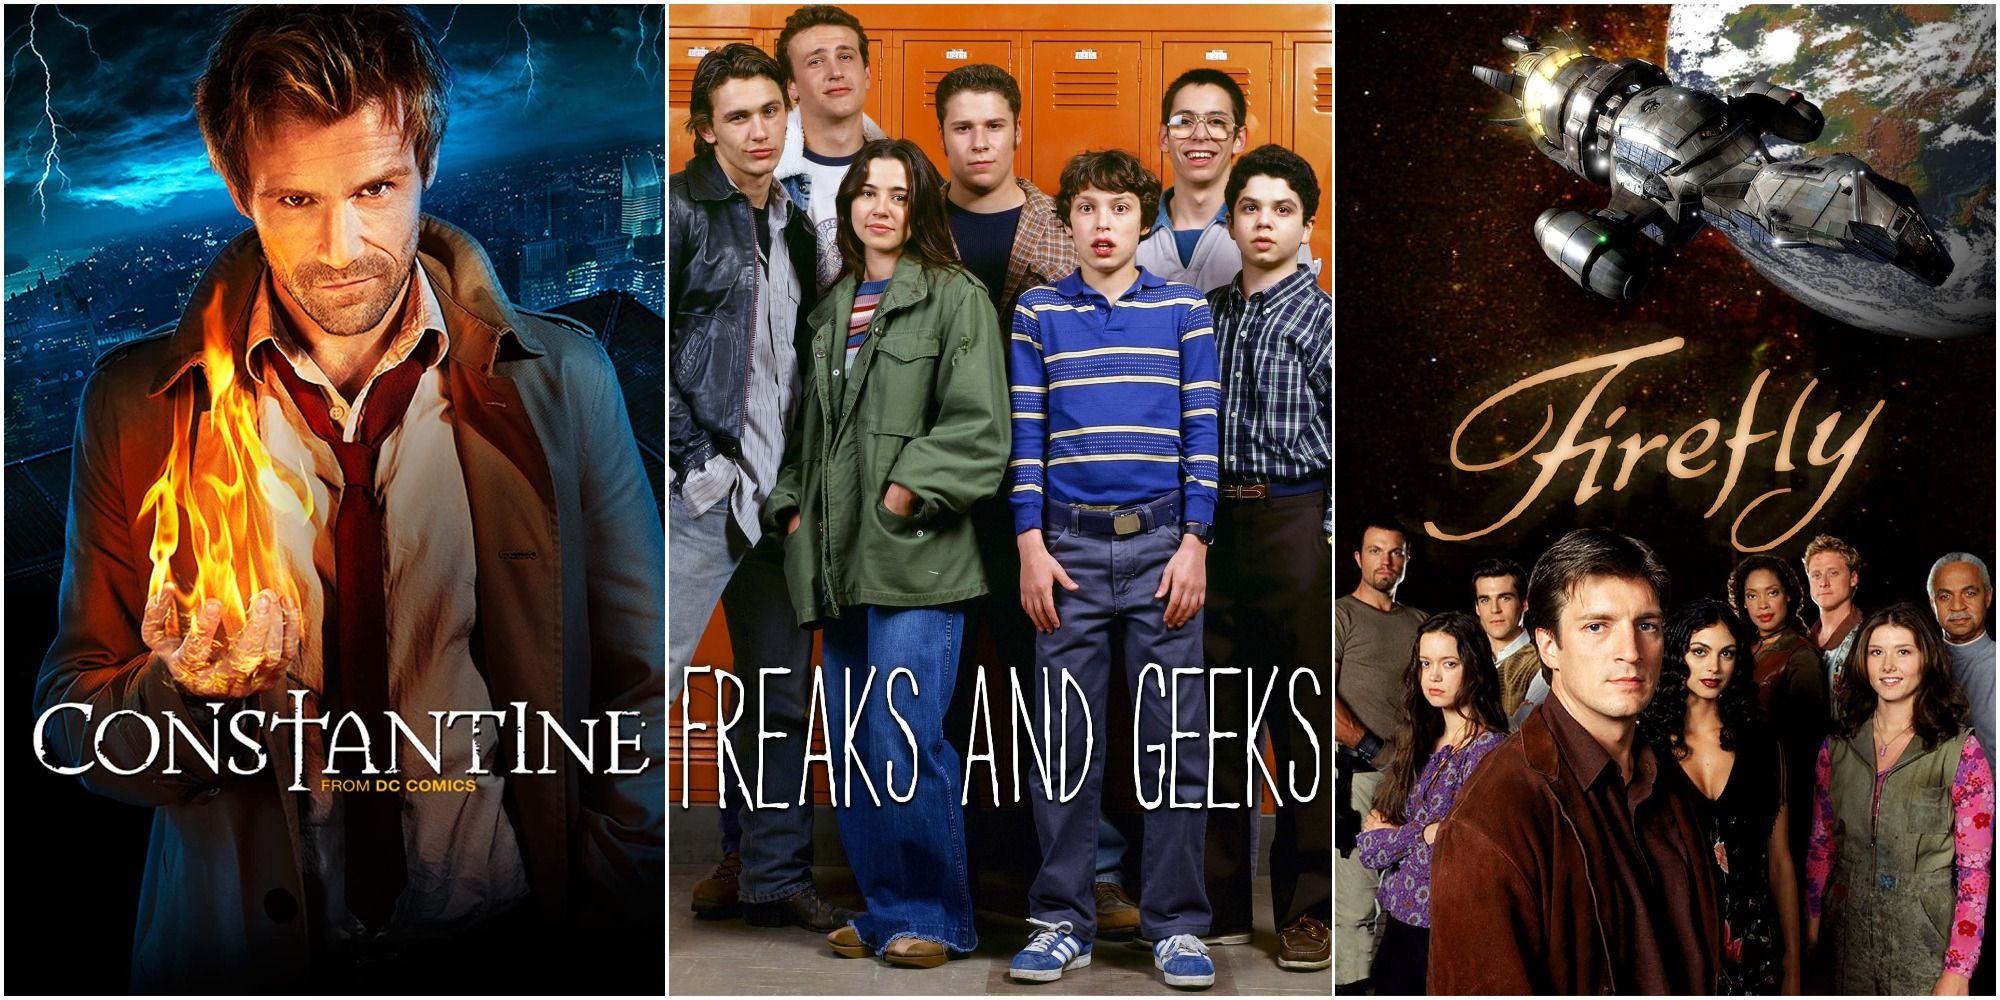 Constantine-Freaks-And-Geeks-Firefly